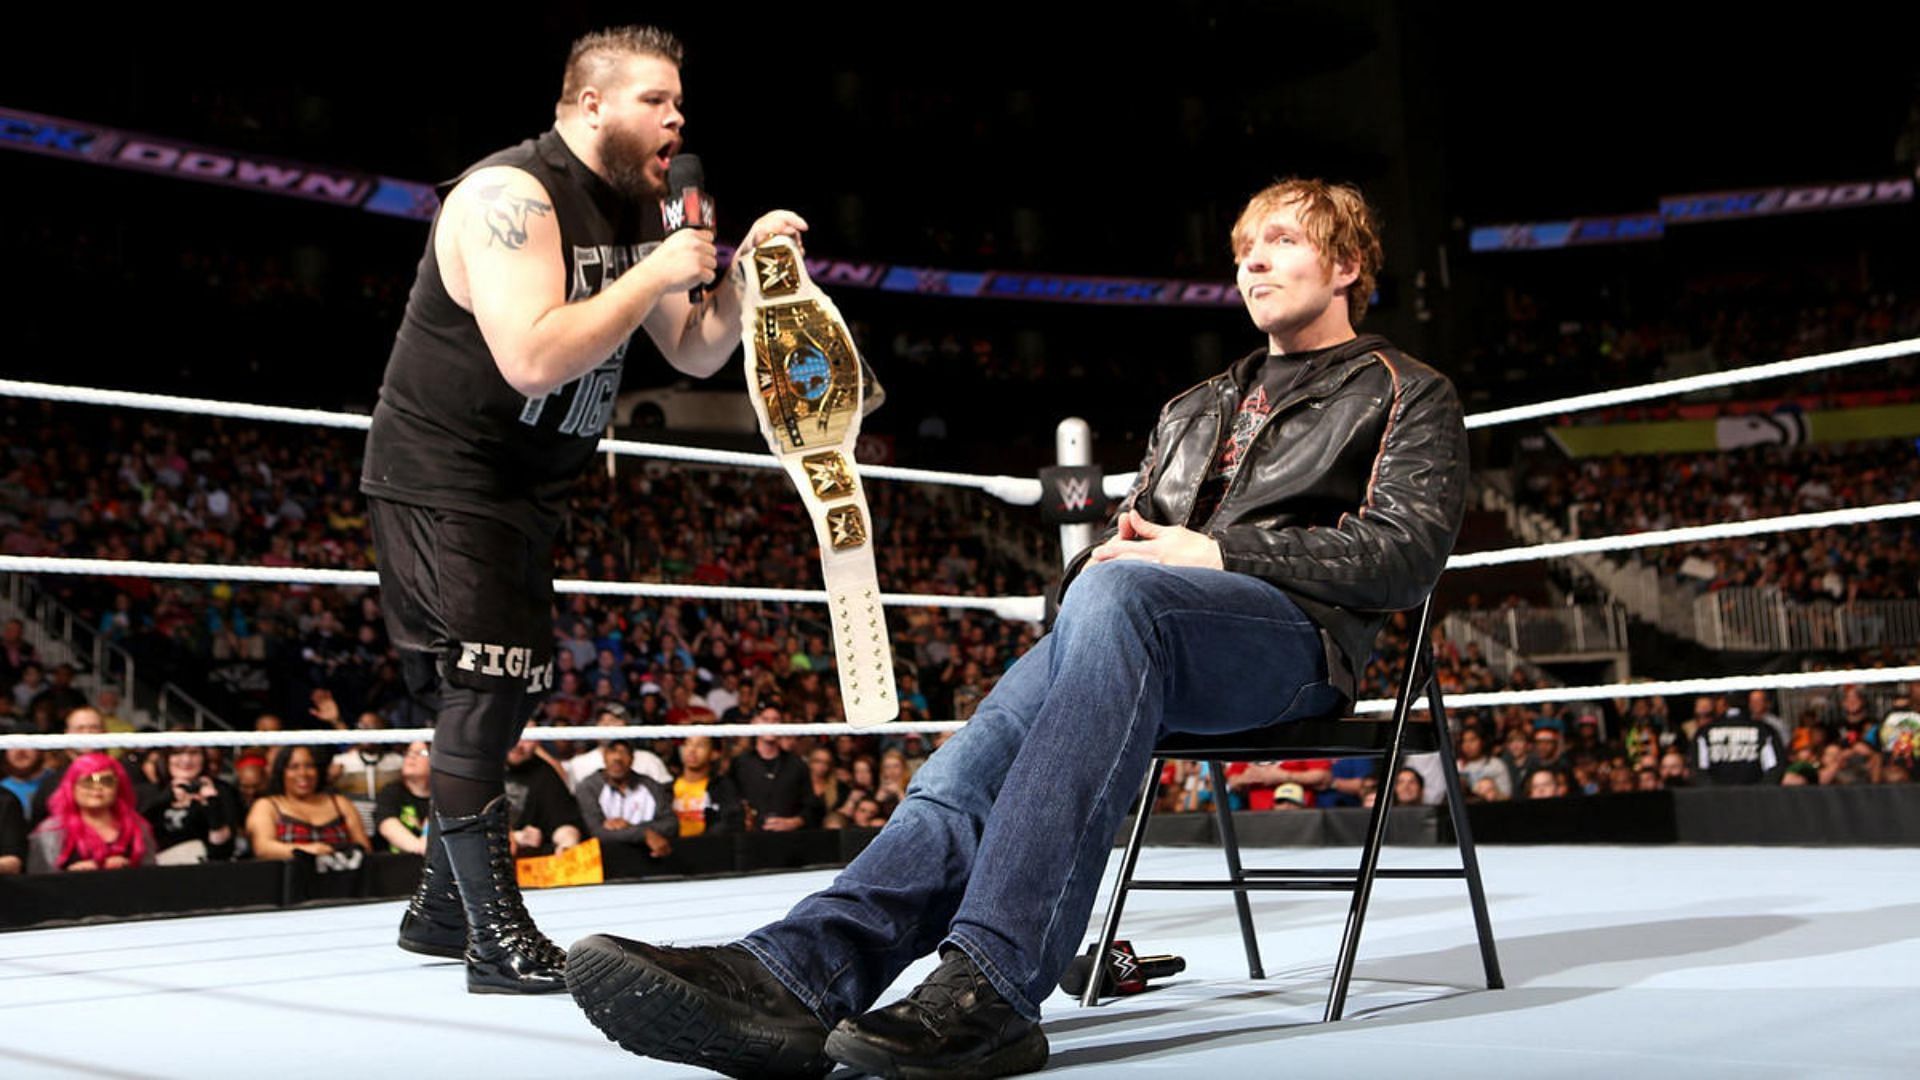 Kevin Owens and Dean Ambrose had a remarkable feud over the title on Friday Nights